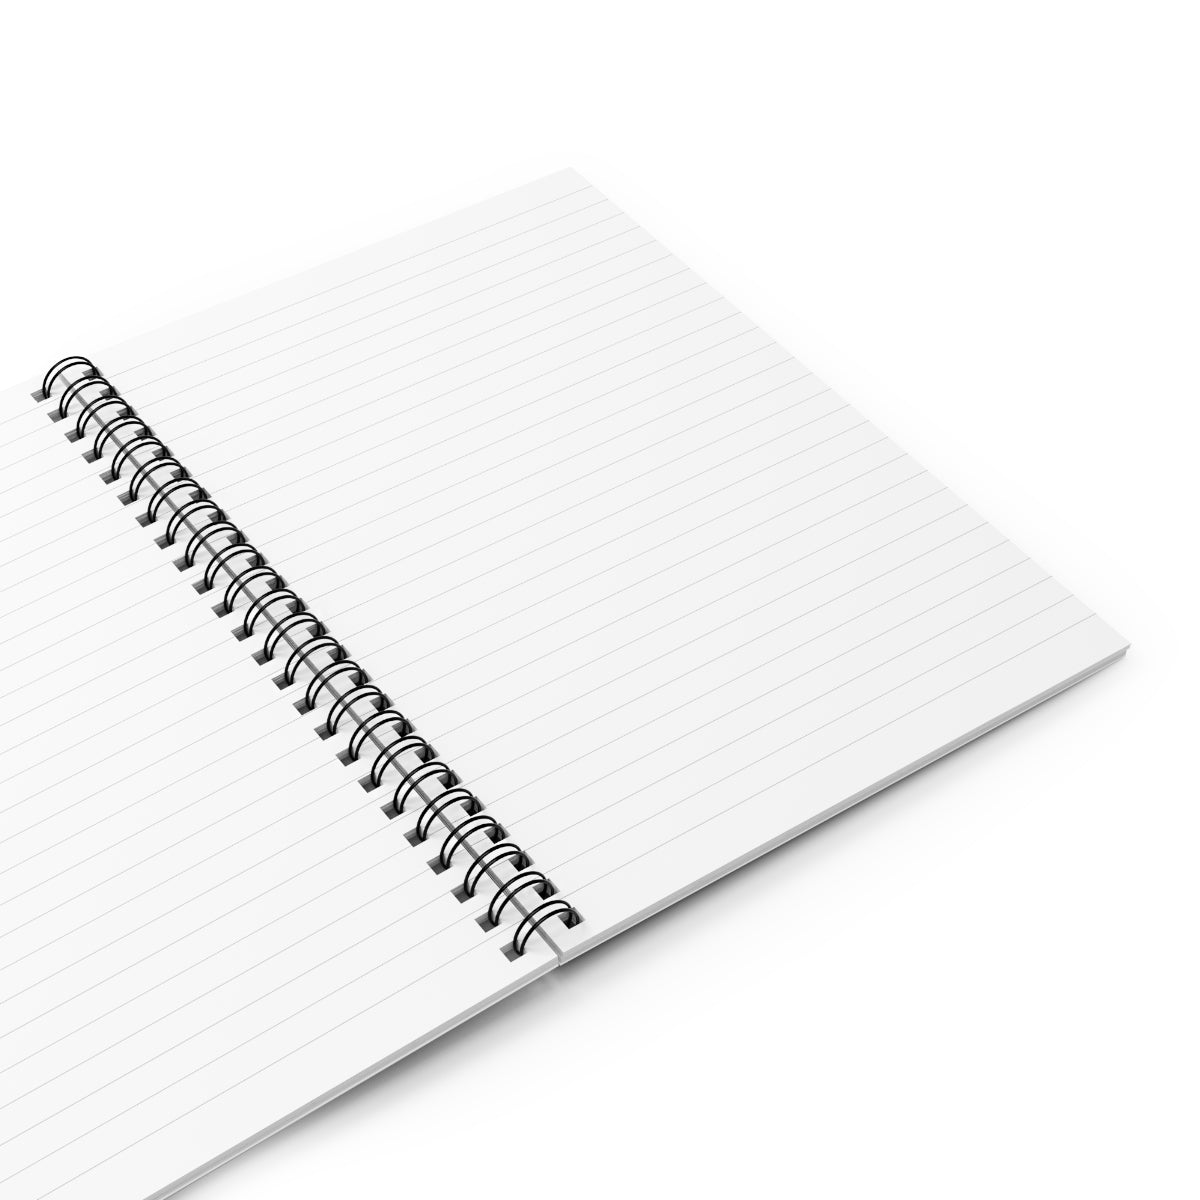 Best Product Operations ever - Blue - Spiral Notebook - Ruled Line